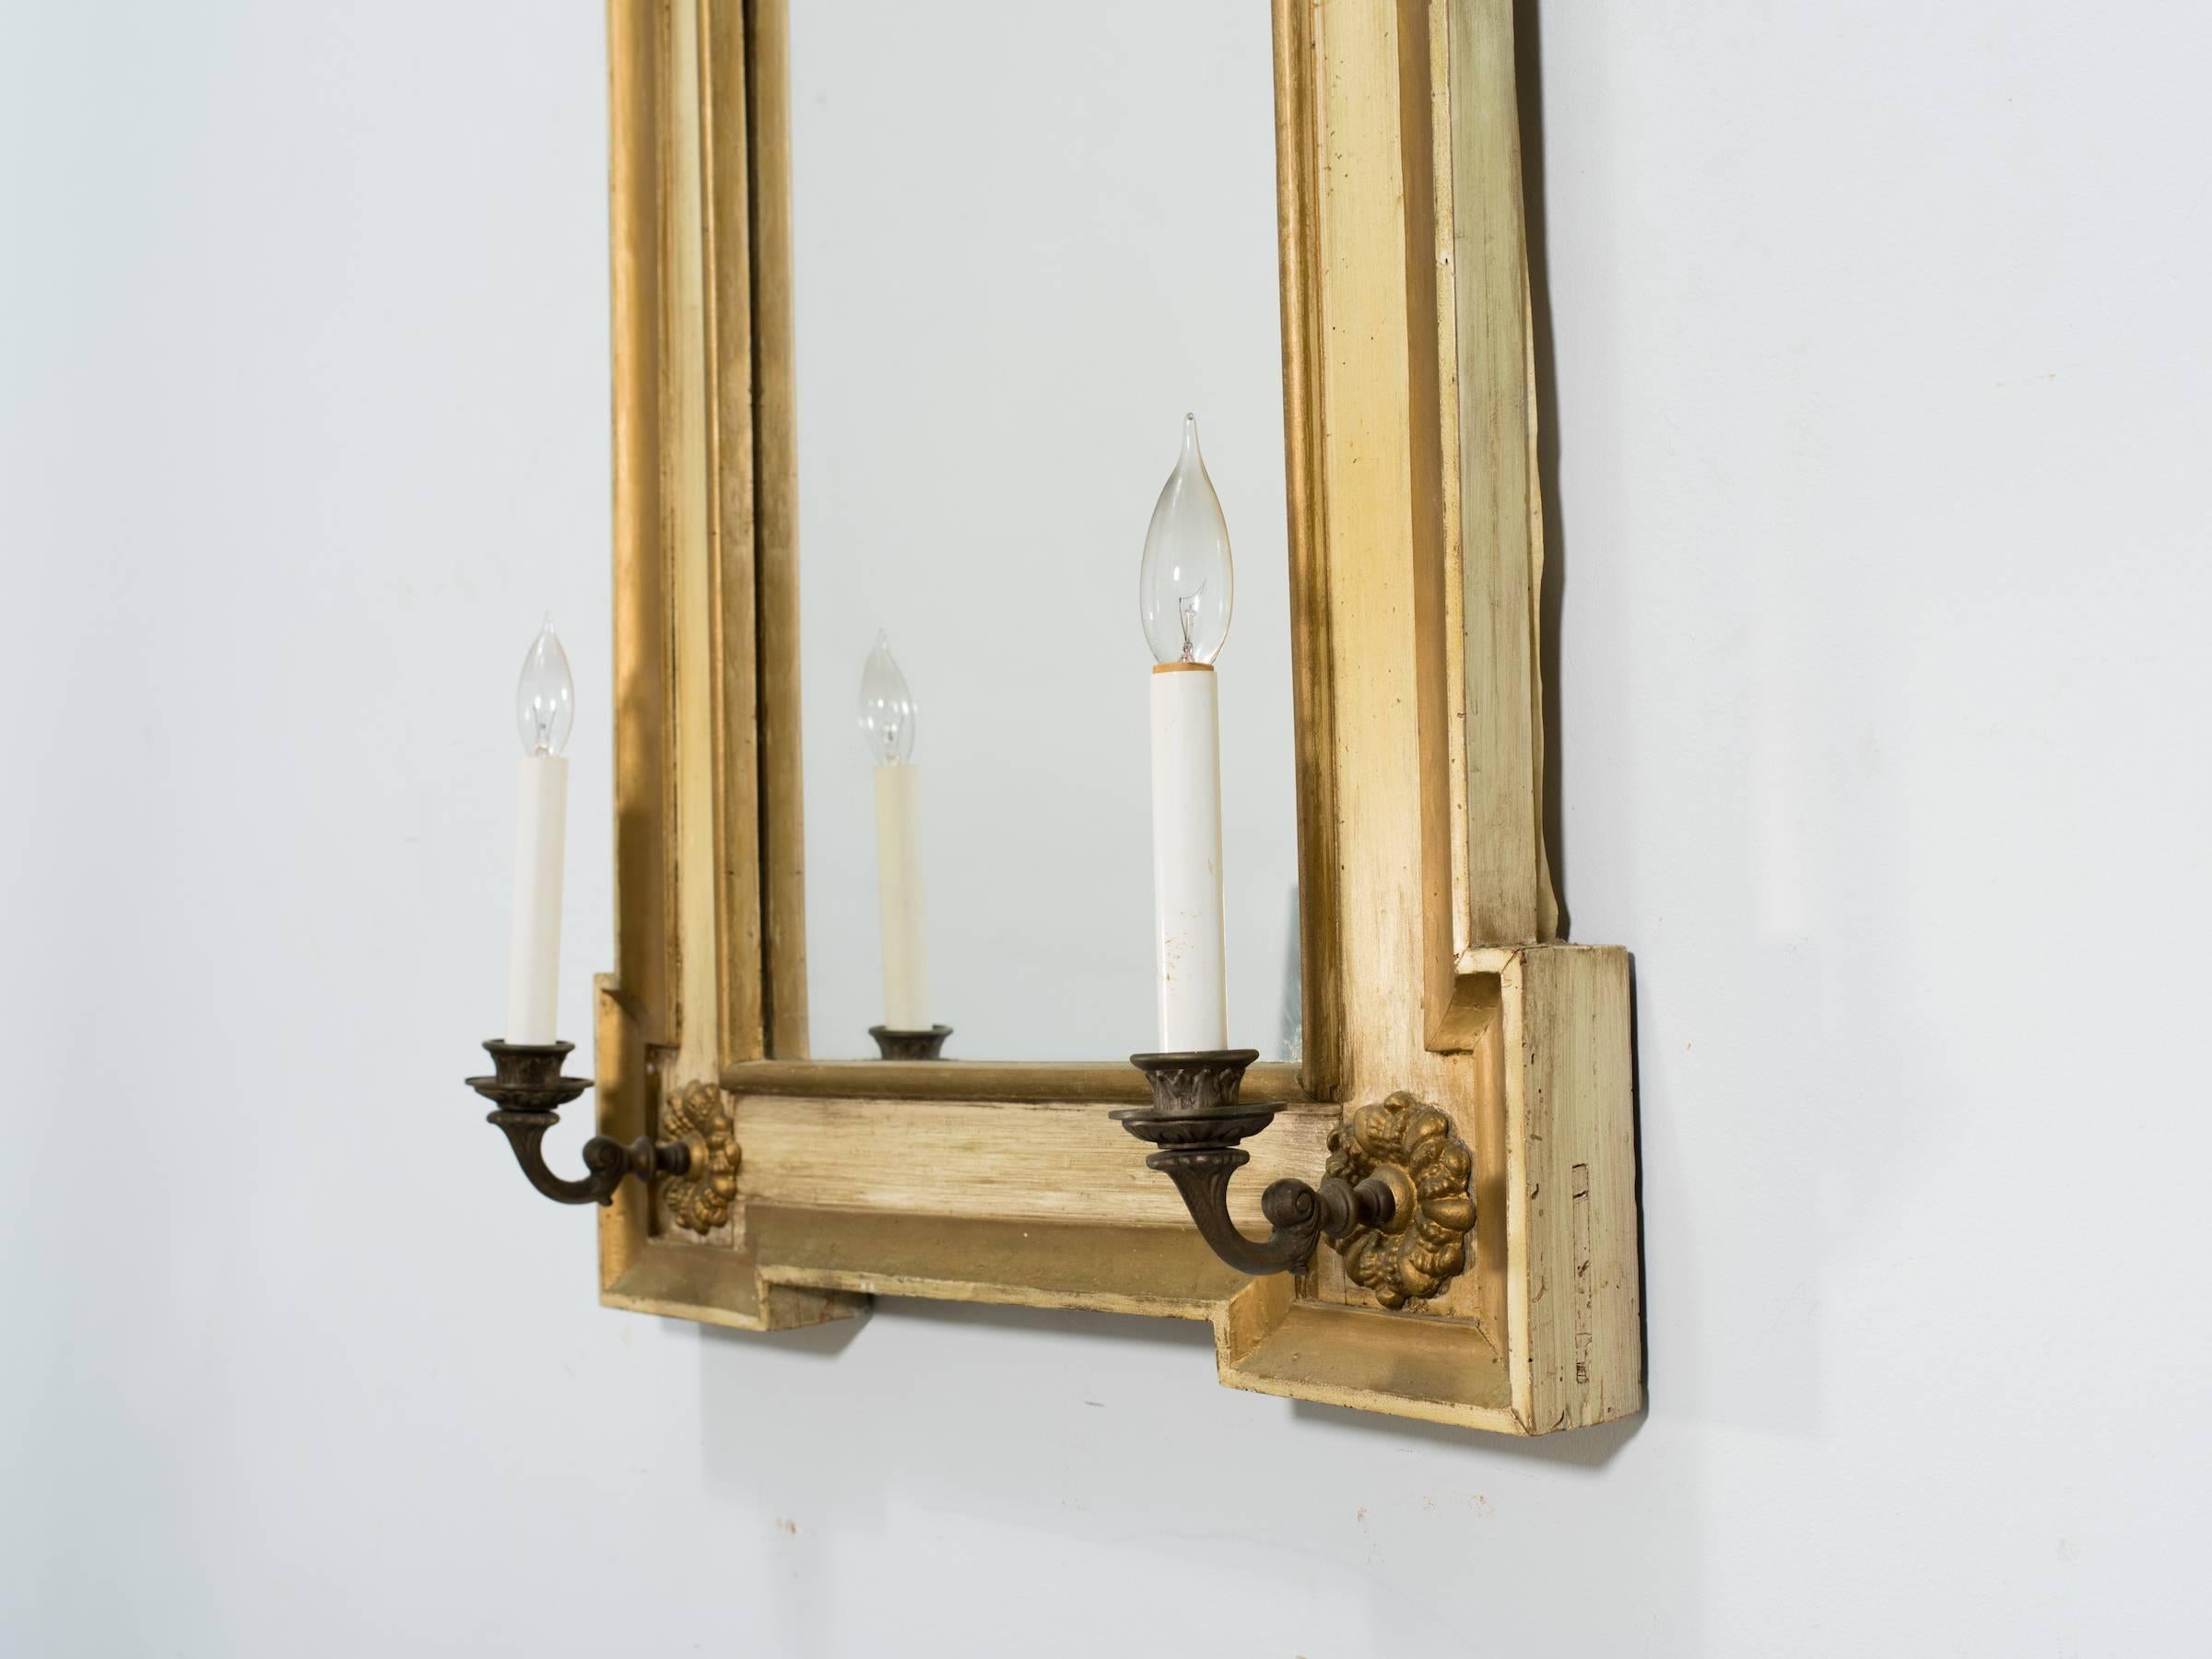 19th century French painted mirror with sconces.